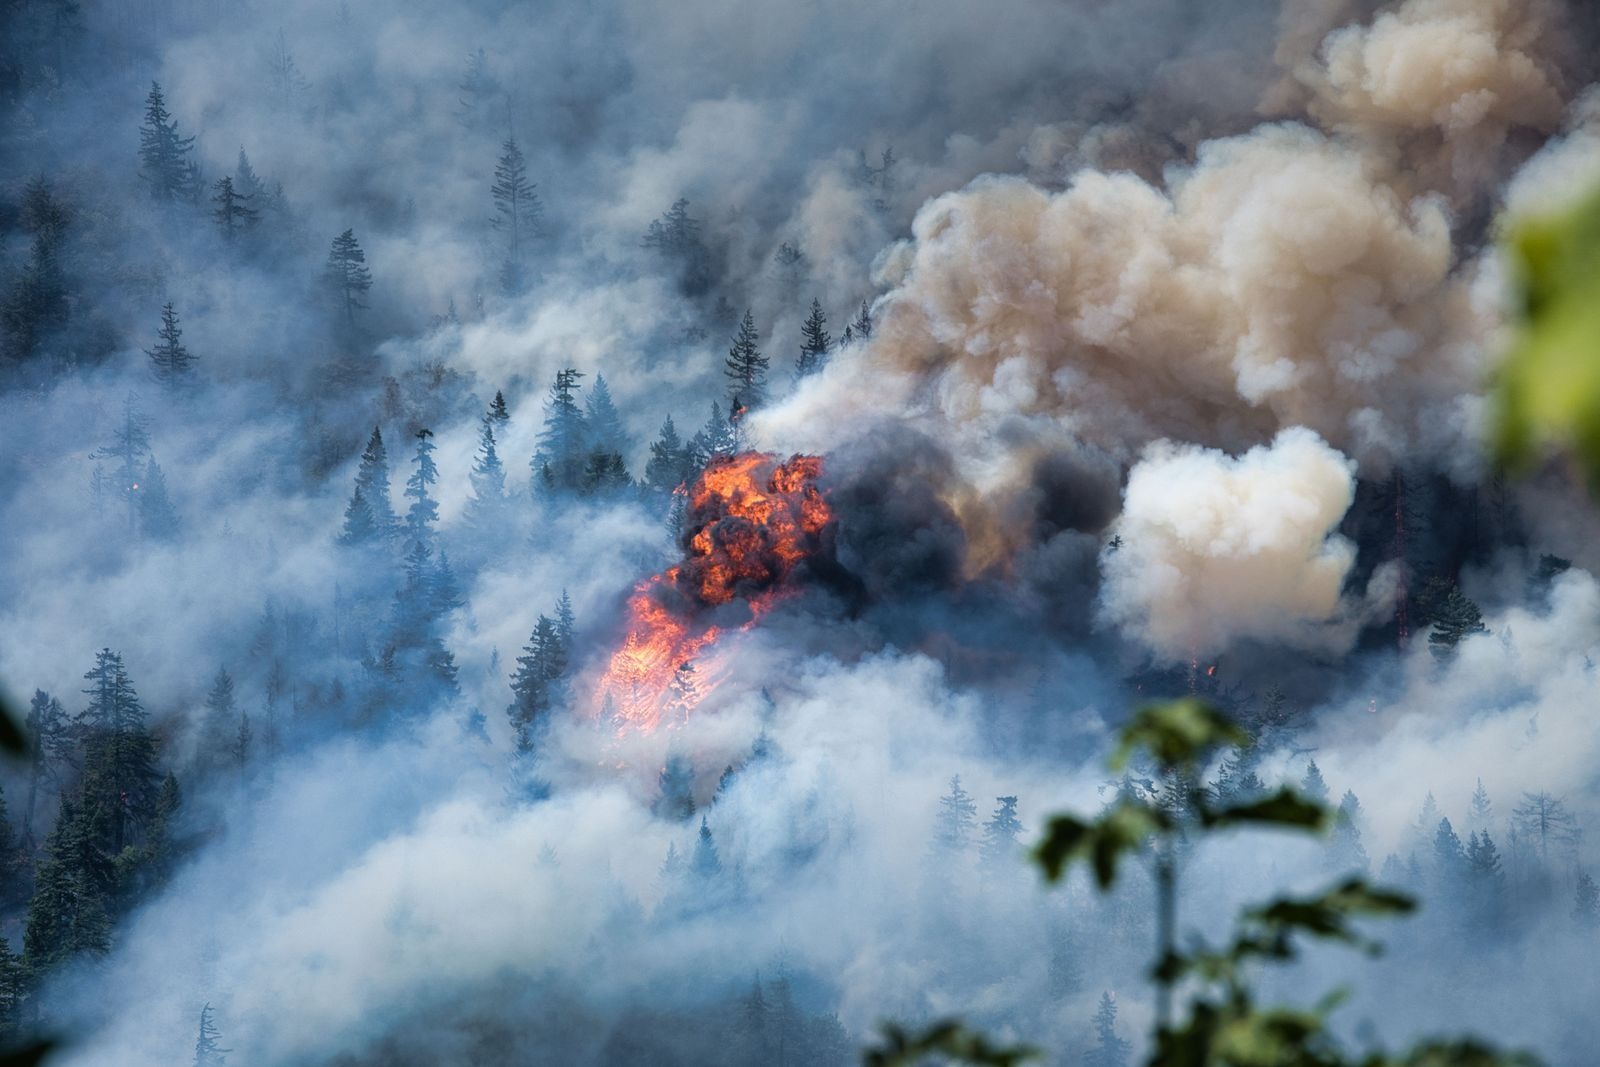 Raging Tunnel Five Fire in Columbia River Gorge Claims Numerous Buildings